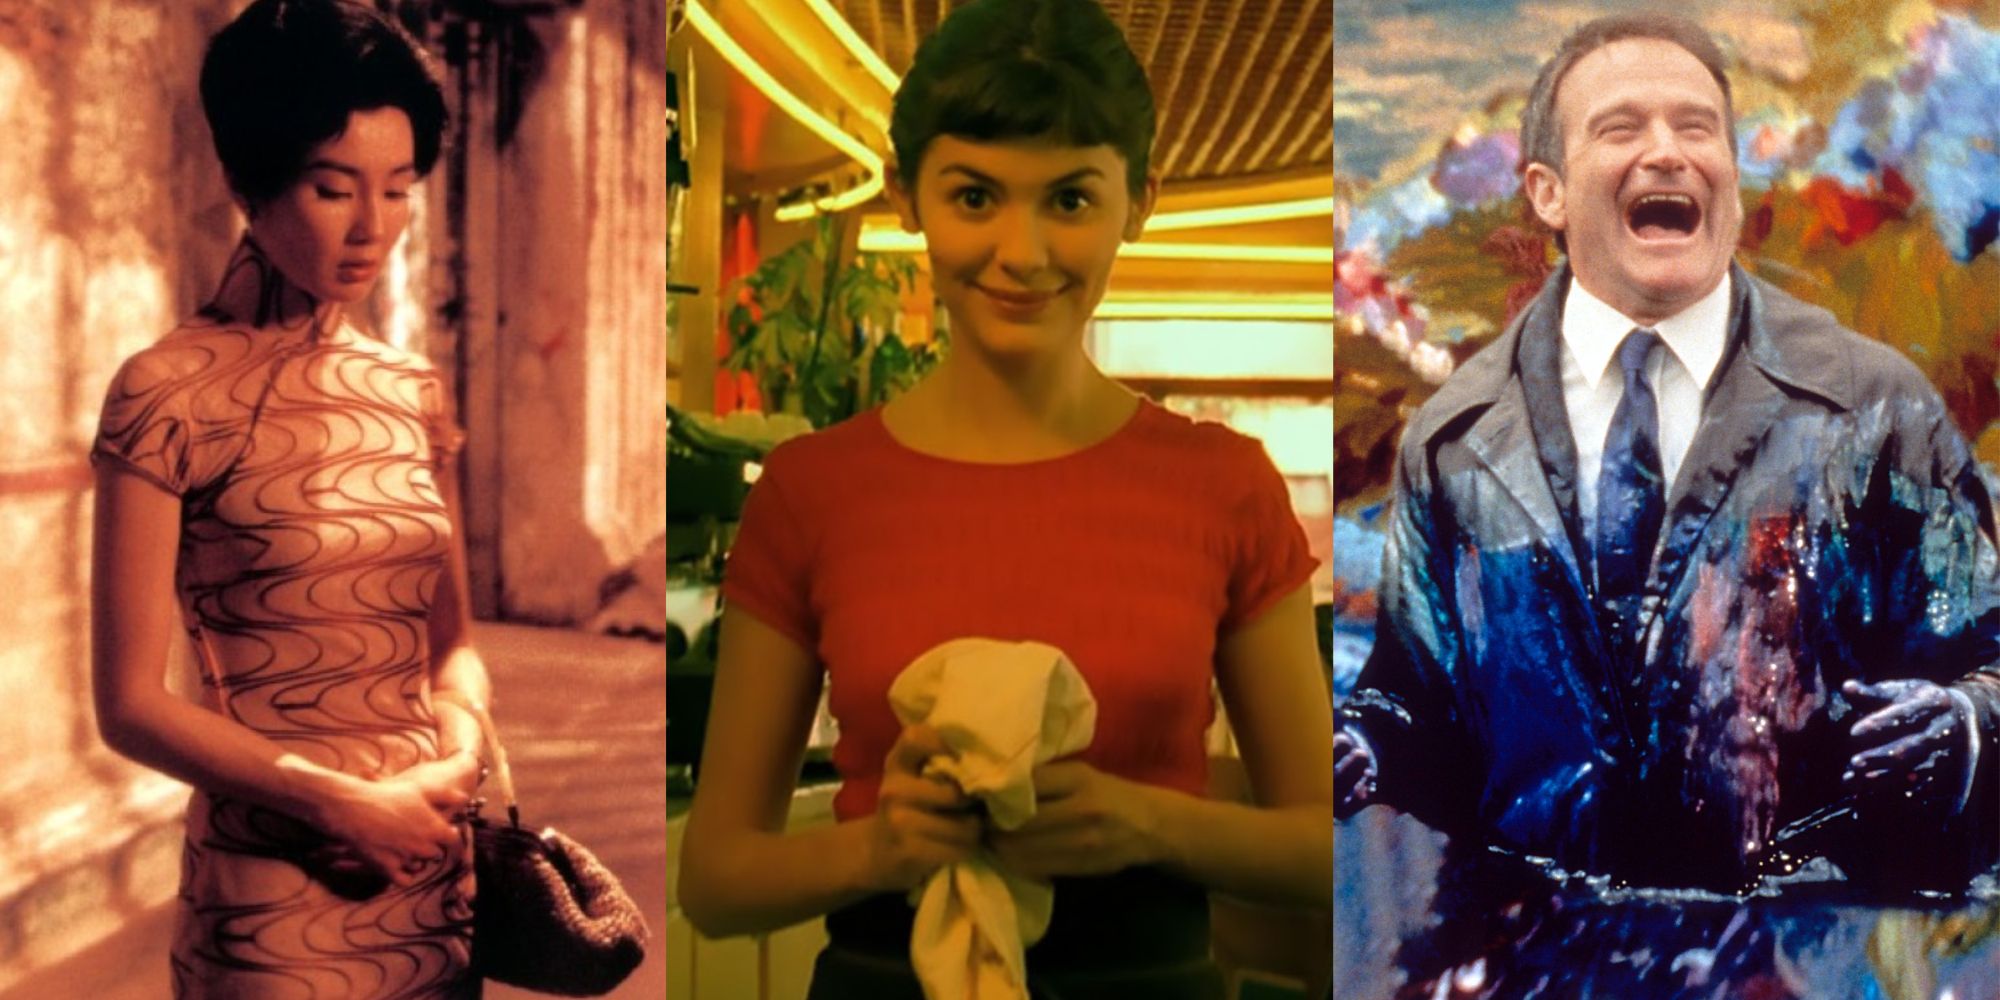 Split images of In the Mood for Love, Amelie, and What Dreams May Come